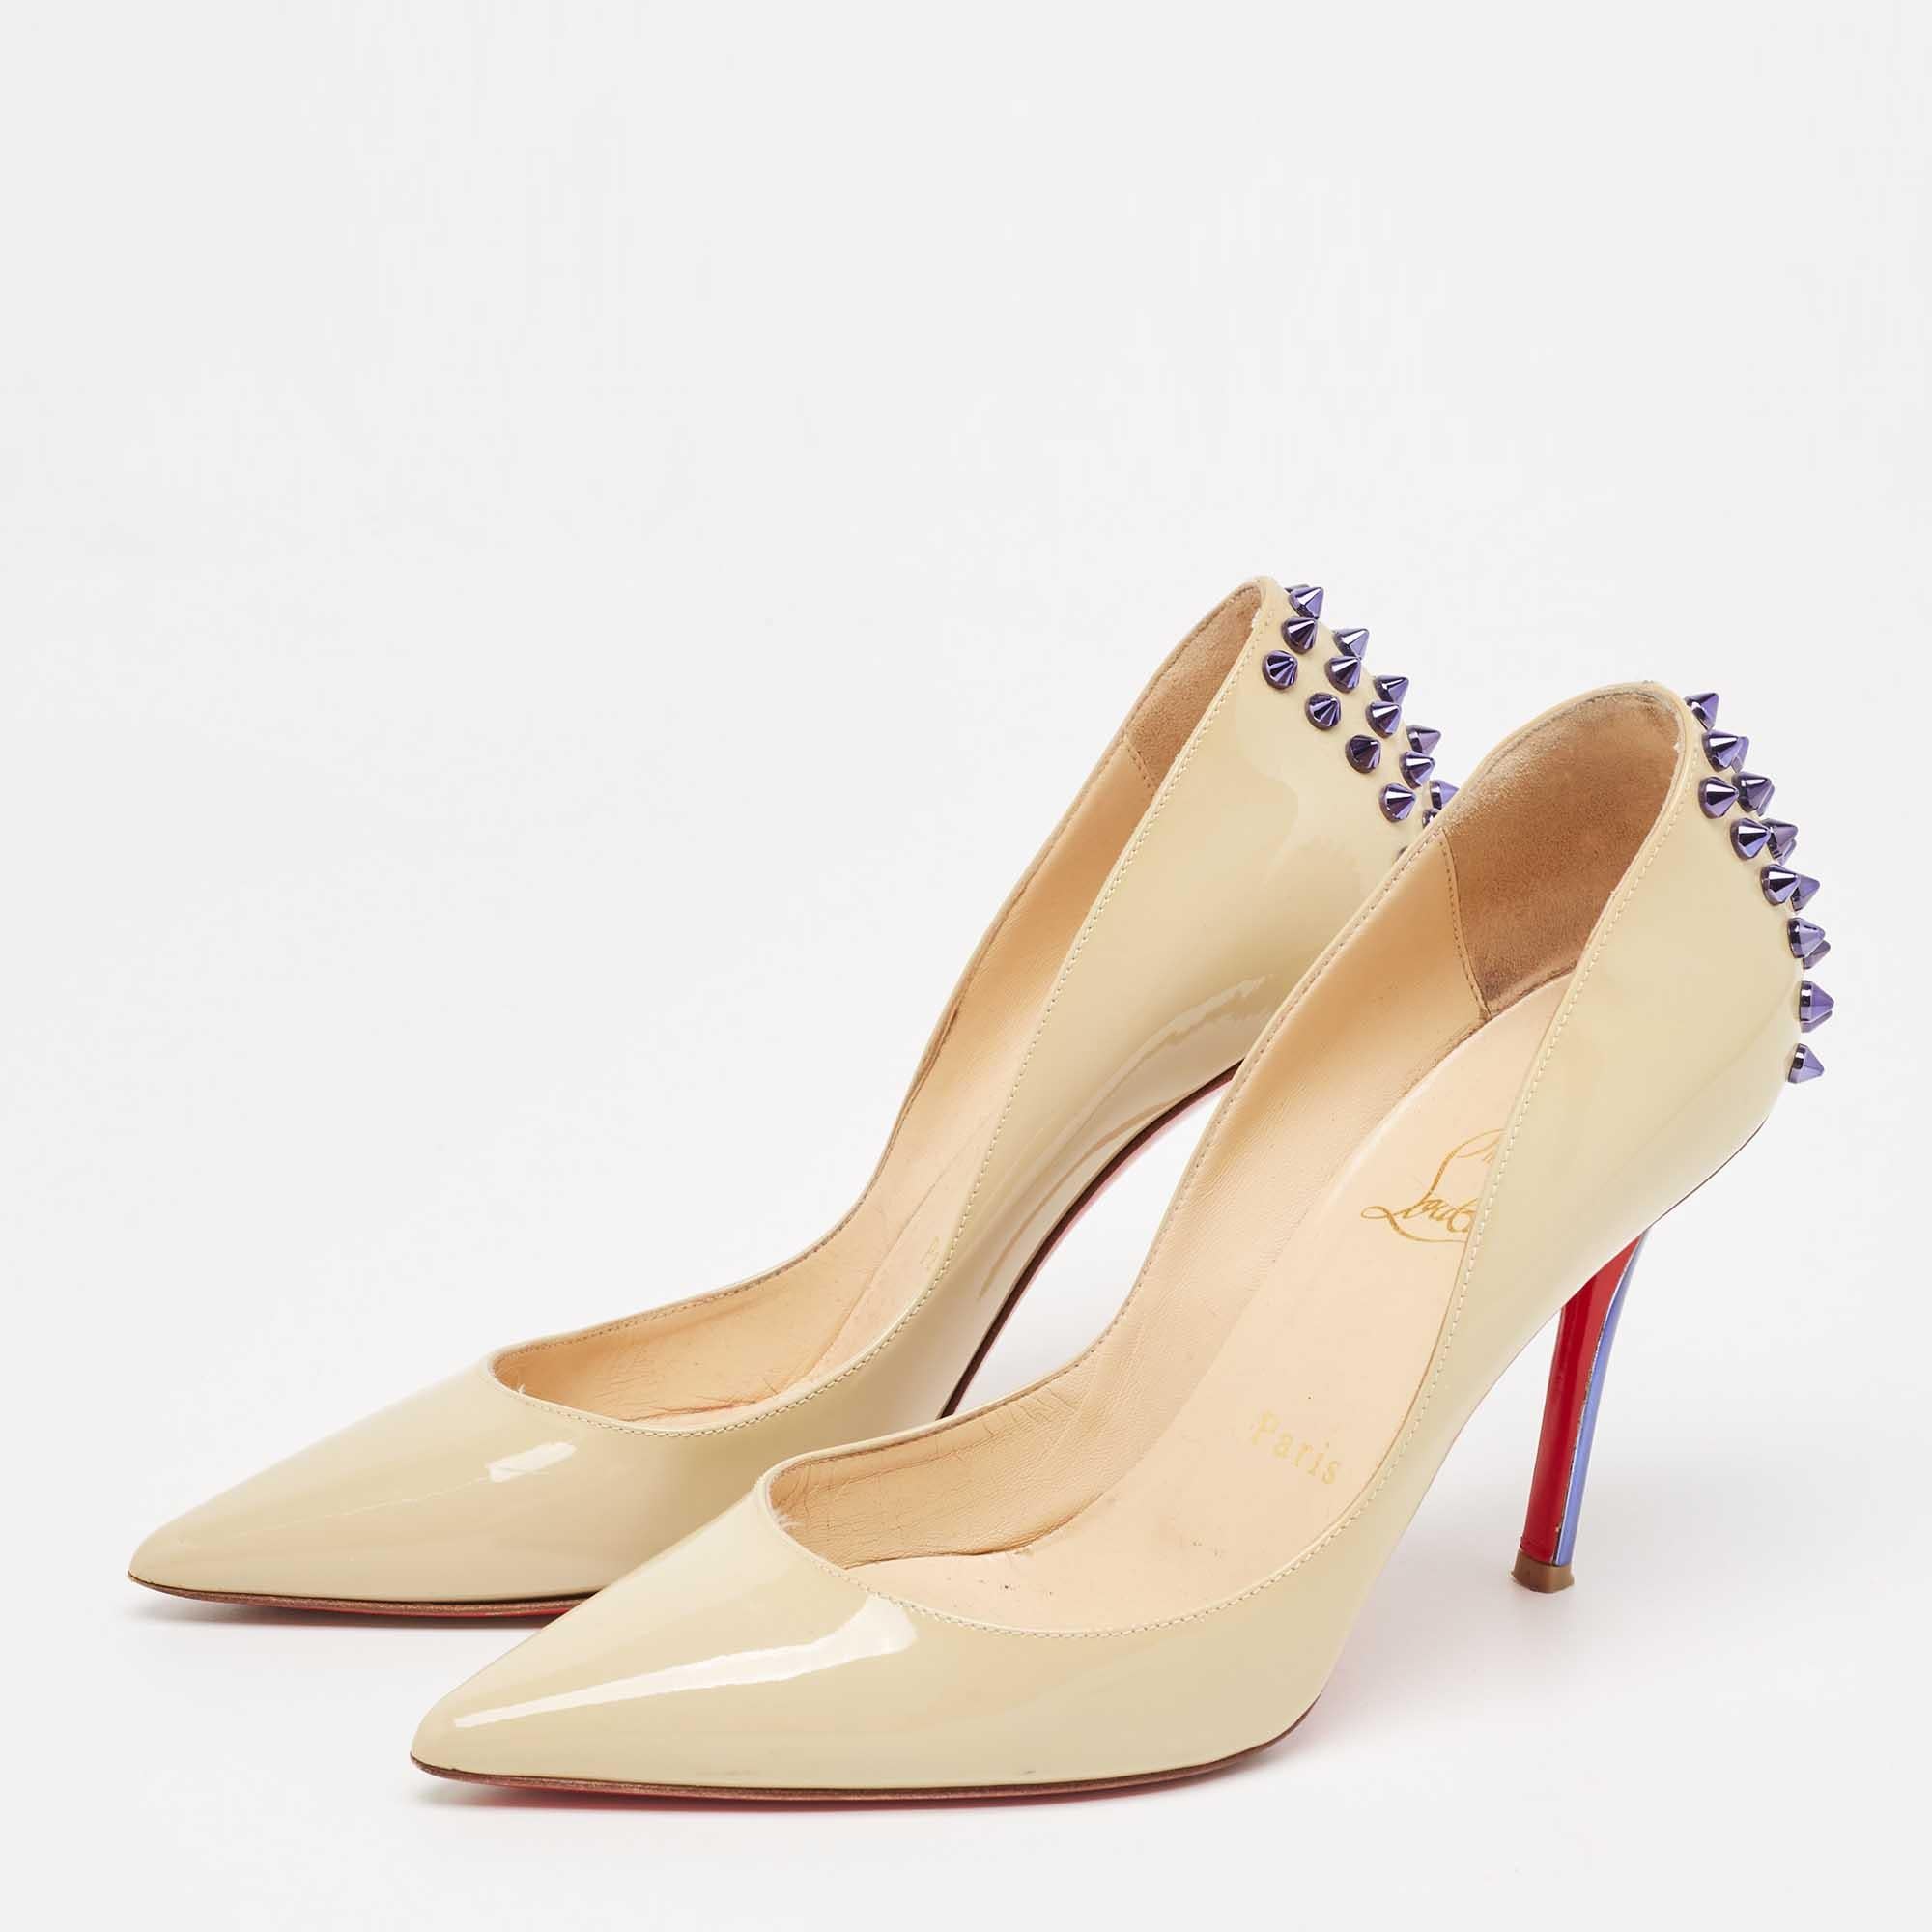 Christian Louboutin Beige Patent Leather Spiked Pumps Size 37 In Good Condition For Sale In Dubai, Al Qouz 2